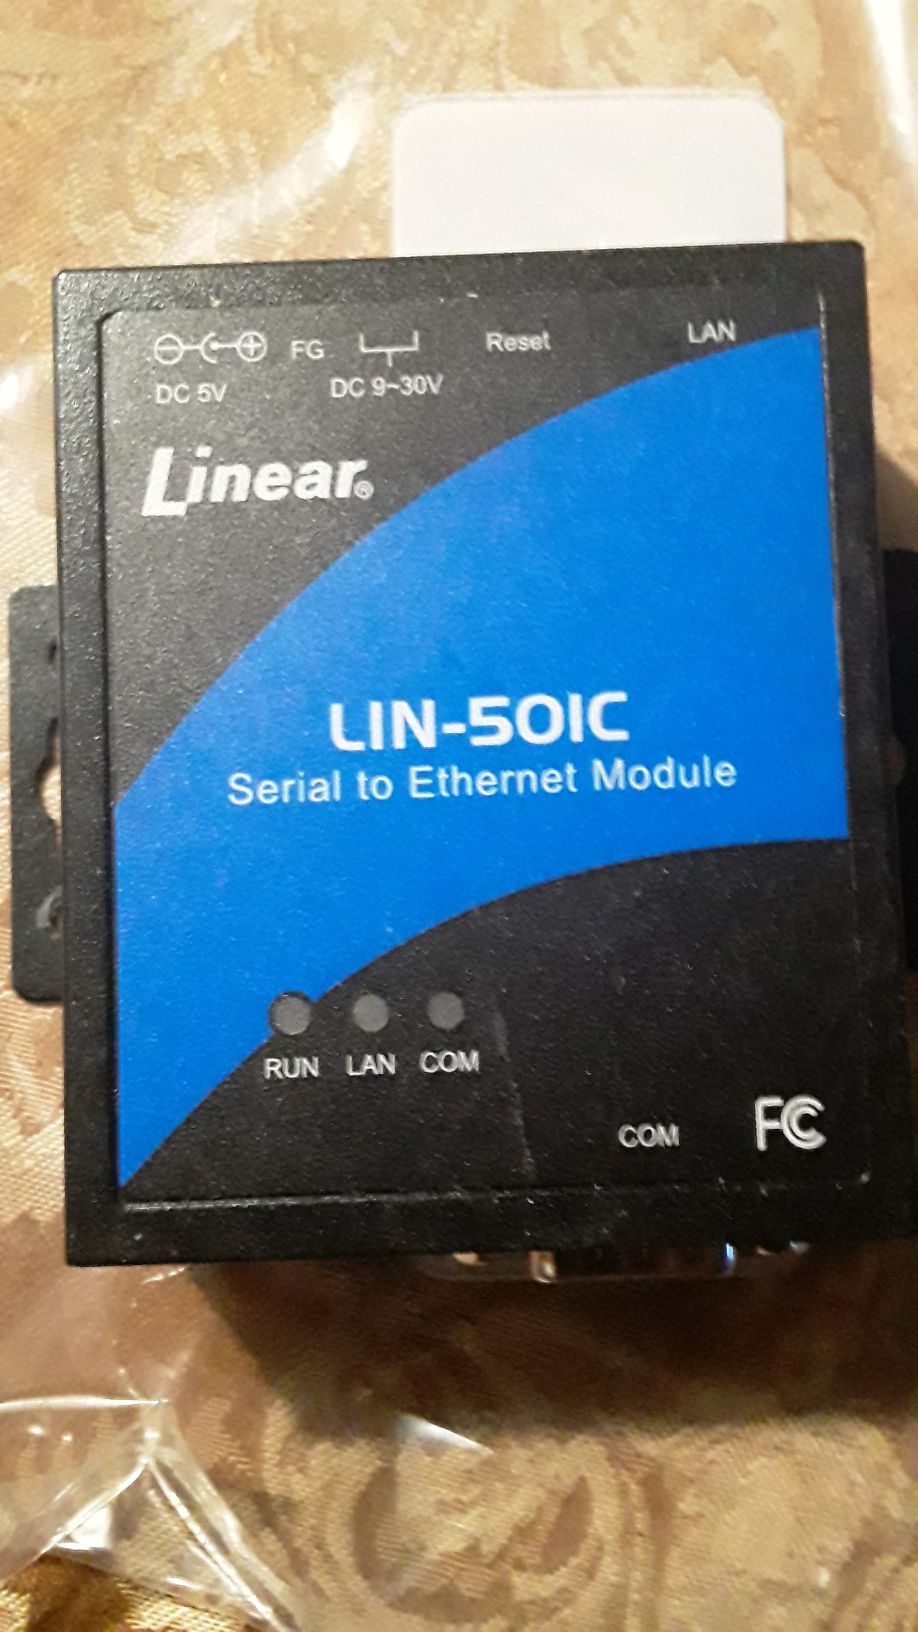 LINEAR AM -SEK SERIAL TO ETHERNET MODULE (Tegular price $200)special price $120 -the converter module connects between the plus panels